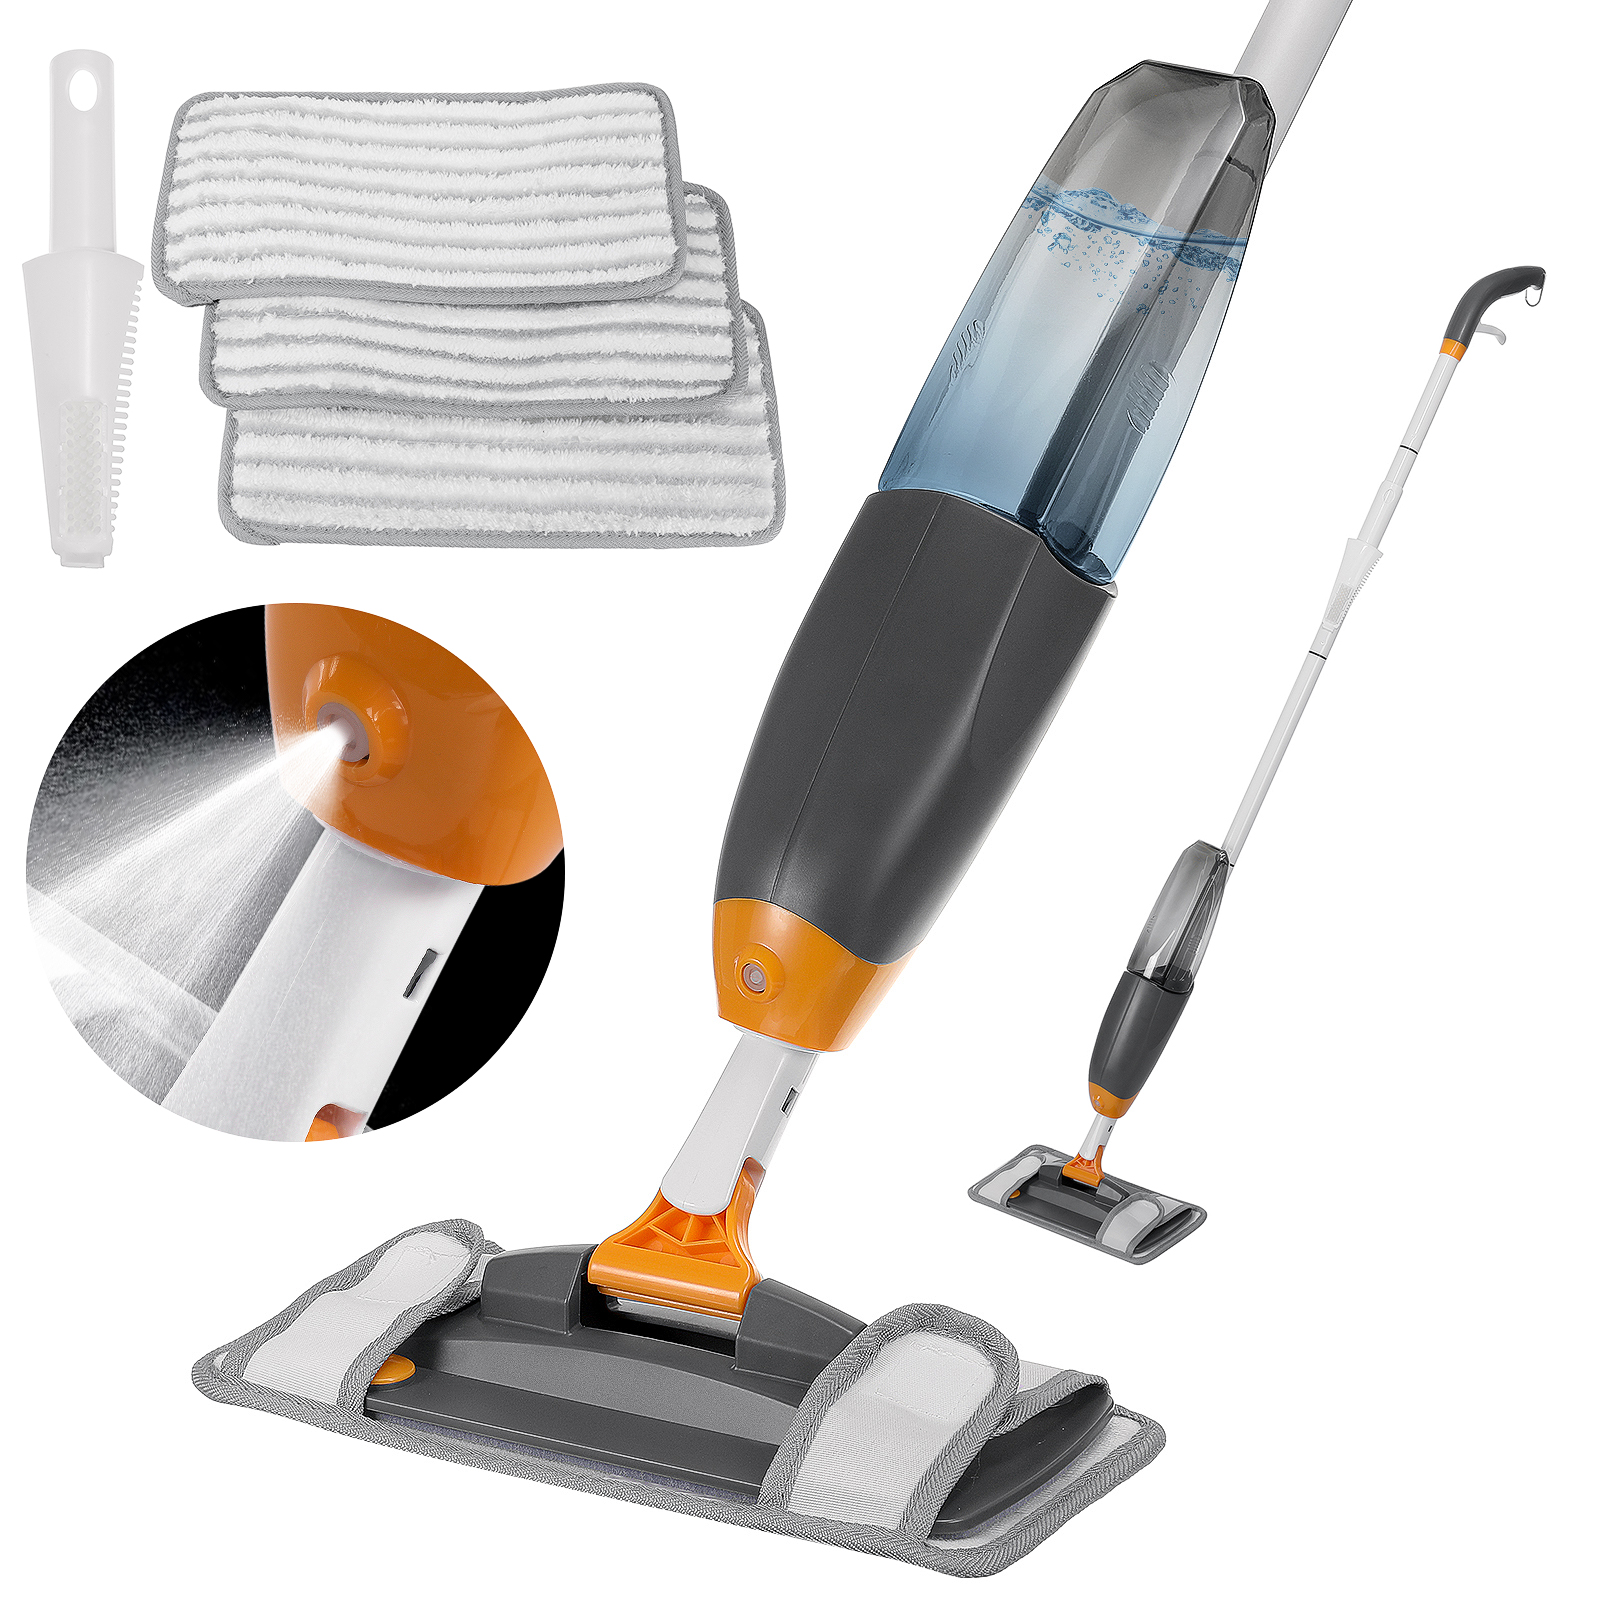 Spray Mops for Floor Cleaning, Refillable Spray Mop with Sprayer